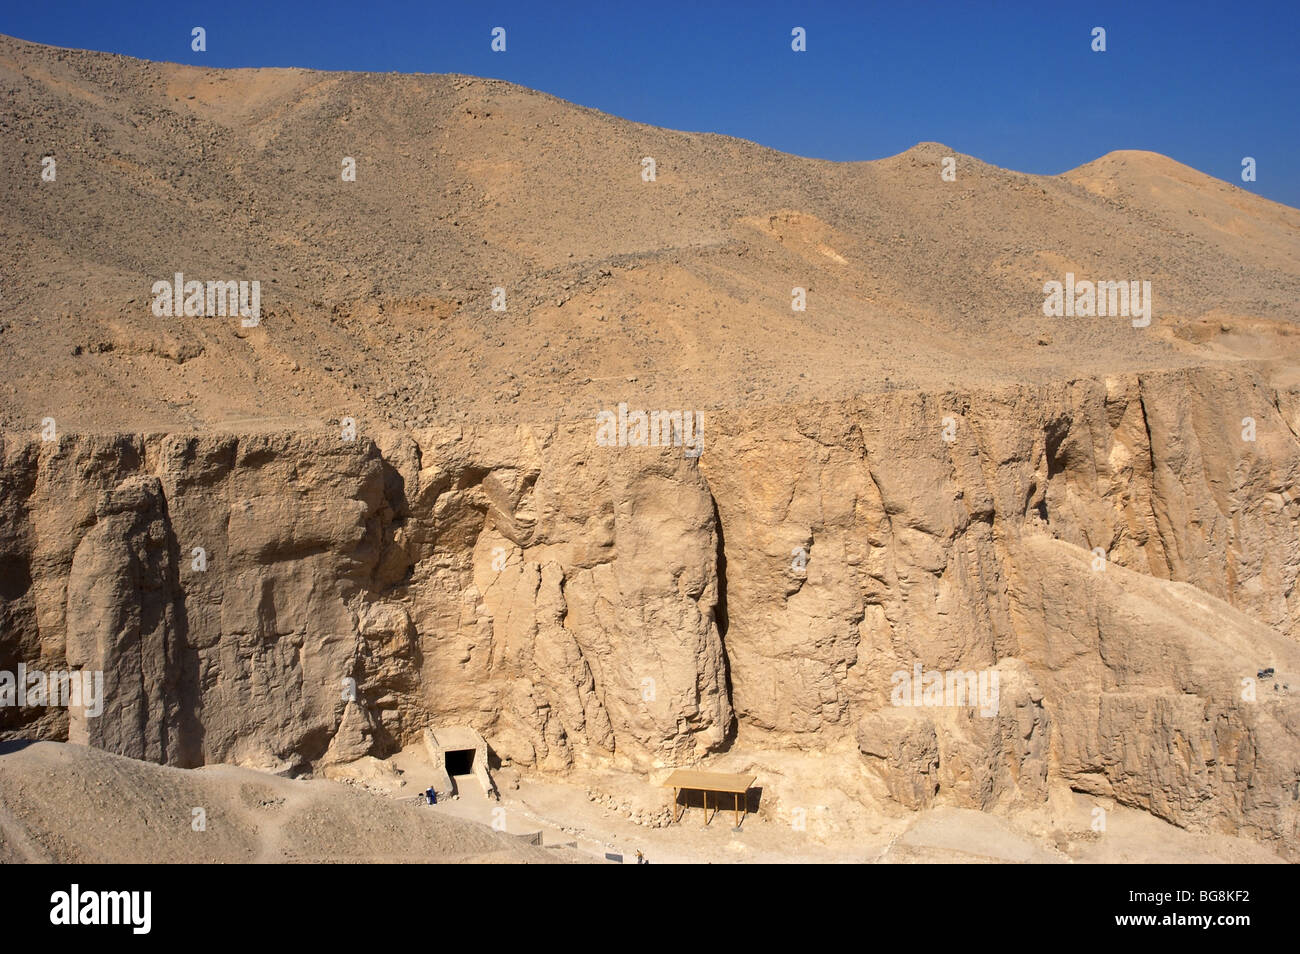 EGYPT. VALLEY OF THE KINGS. In the rock walls are carved the tombs of the pharaohs of the New Kingdom. Stock Photo